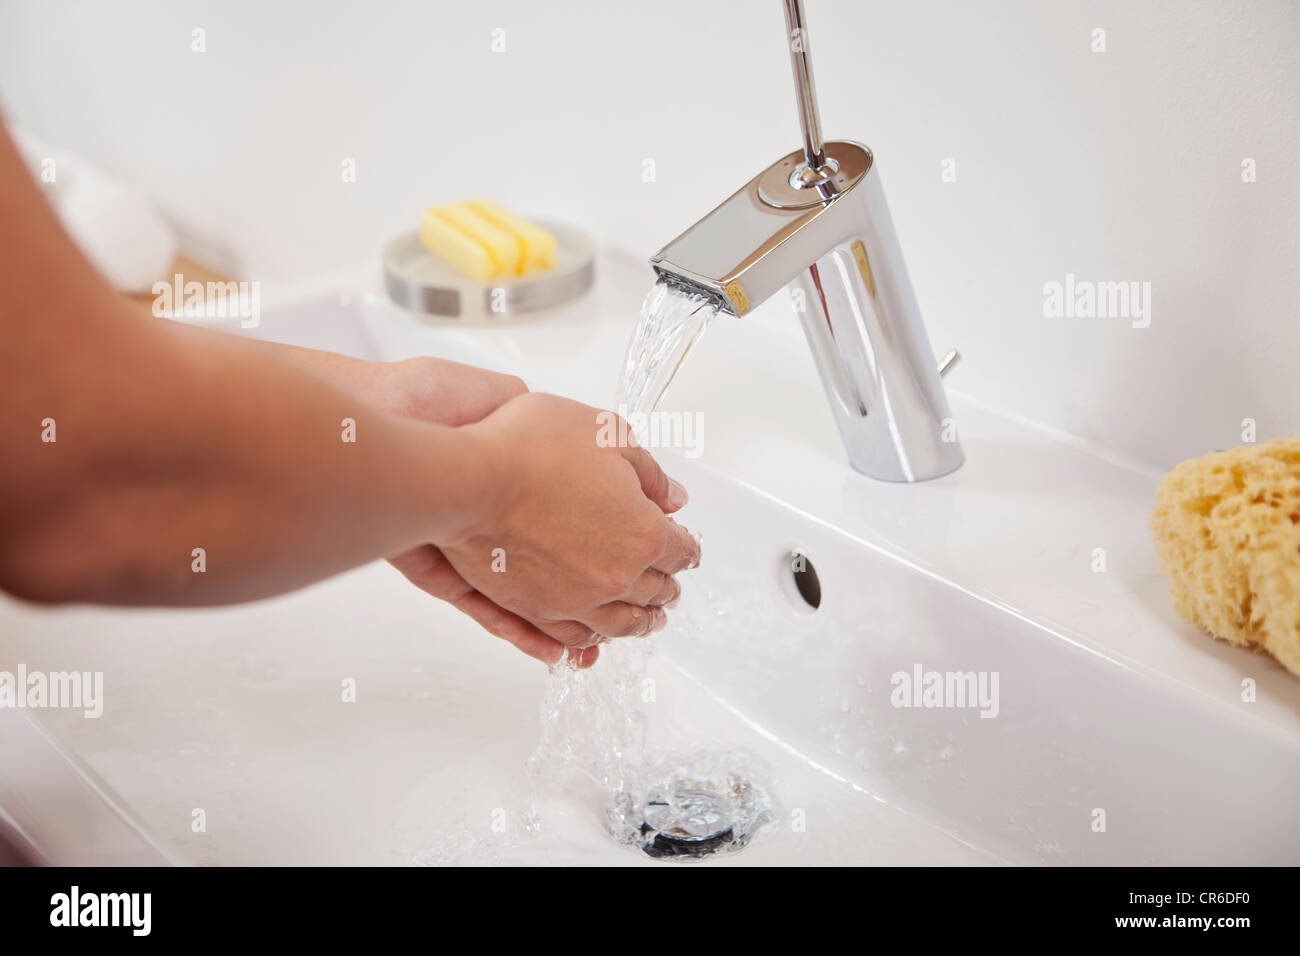 Germany, Bavaria, Young woman washing hands in bathroom sink Stock Photo